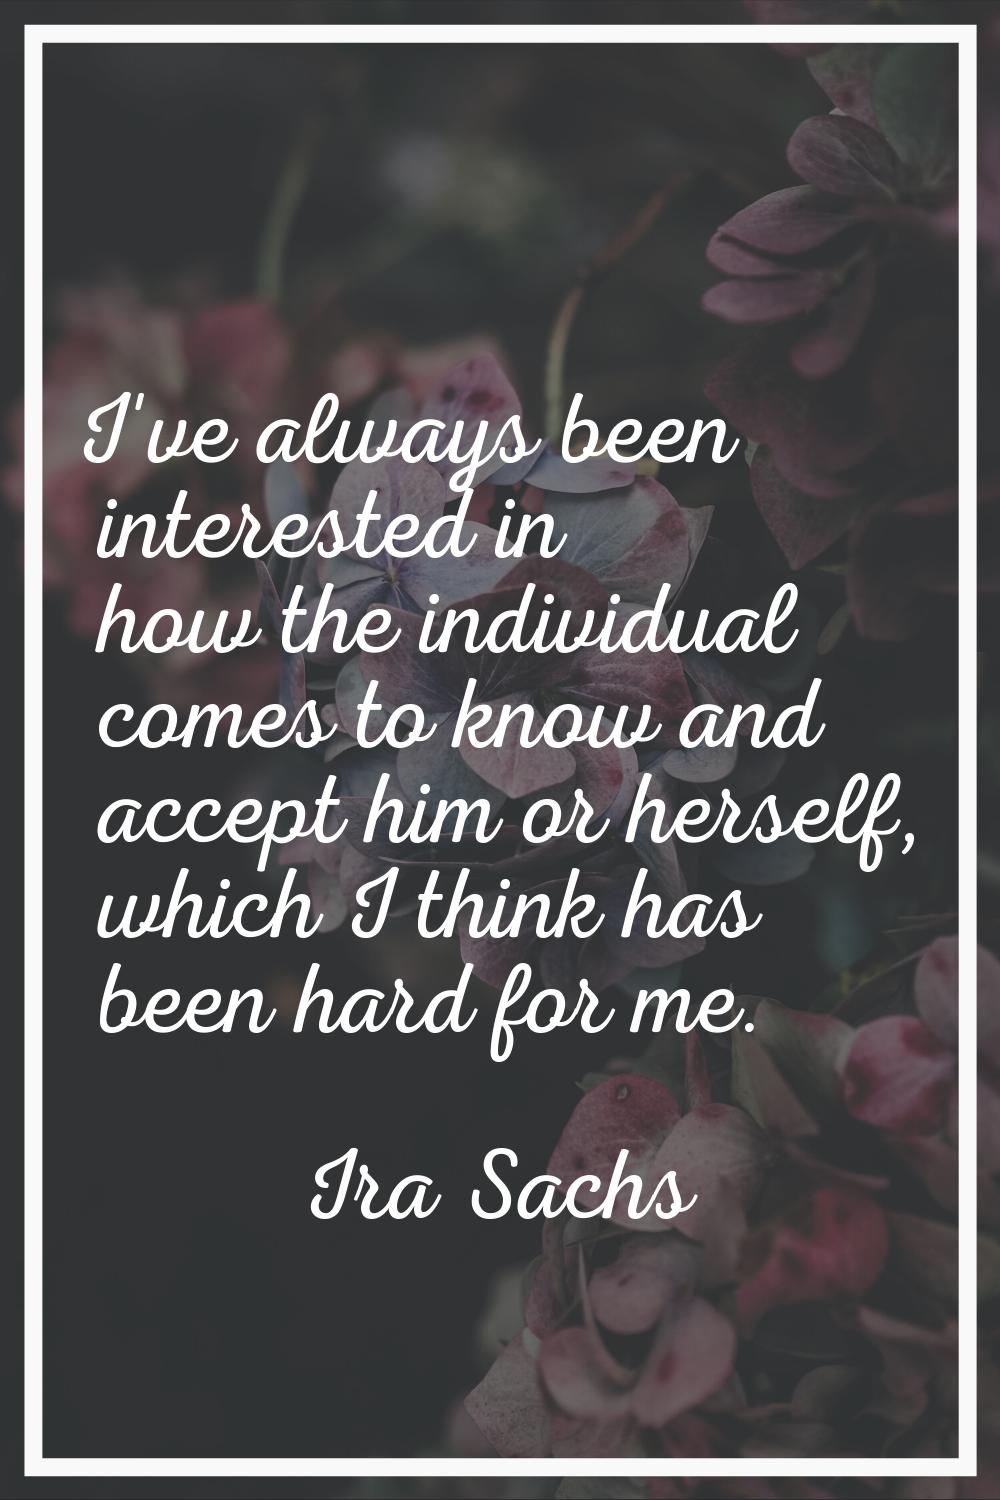 I've always been interested in how the individual comes to know and accept him or herself, which I 